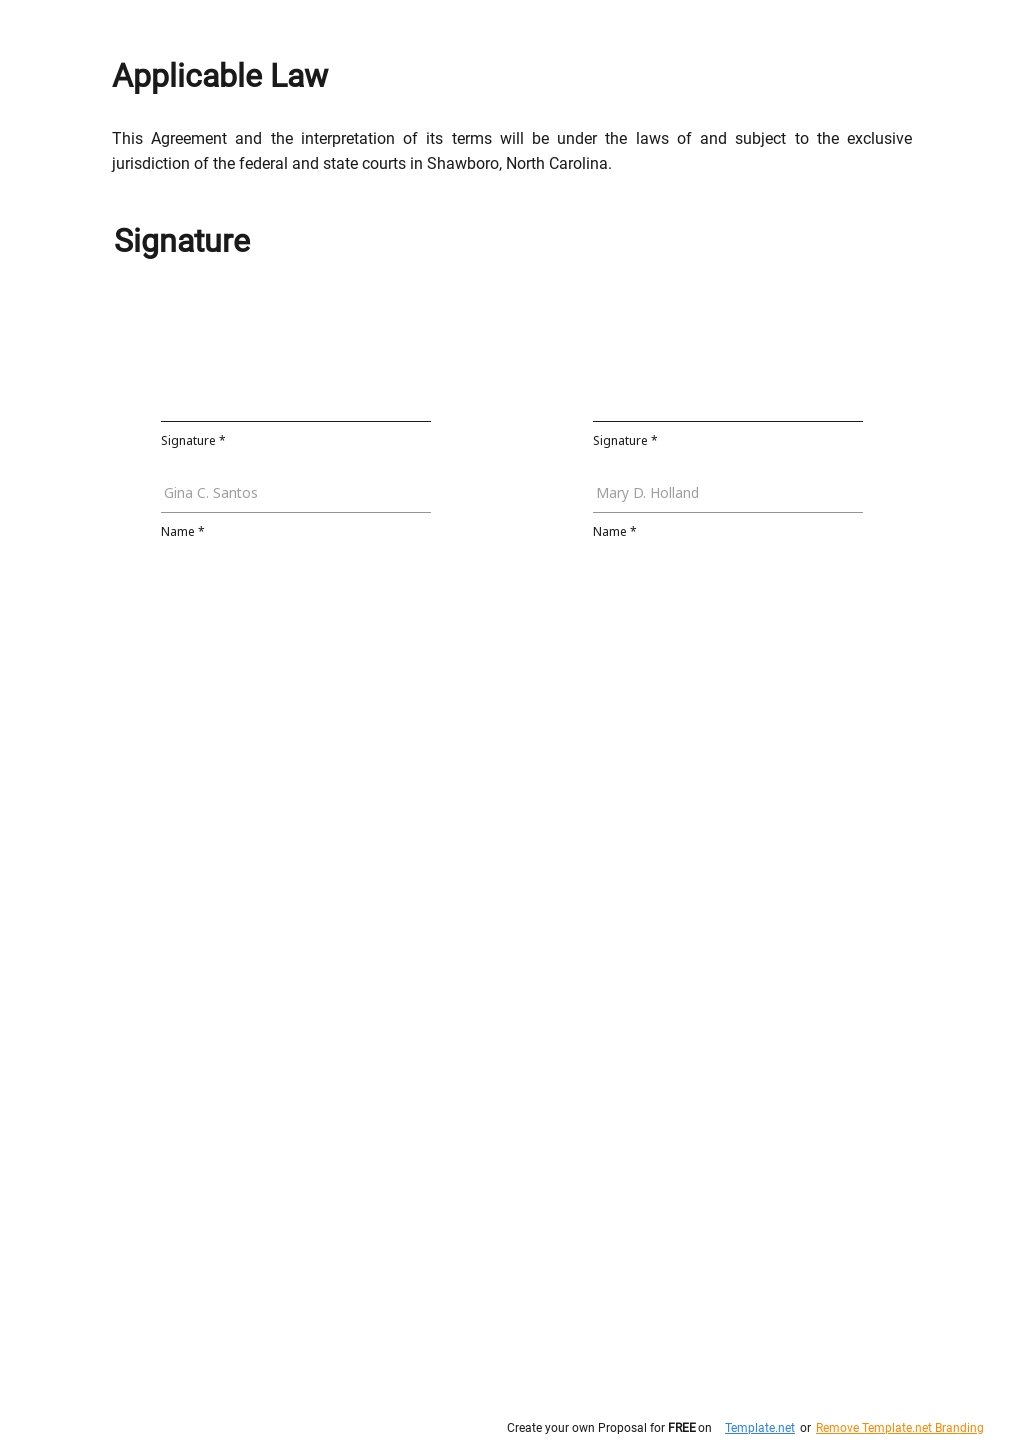 Release And Hold Harmless Agreement Template 2.jpe